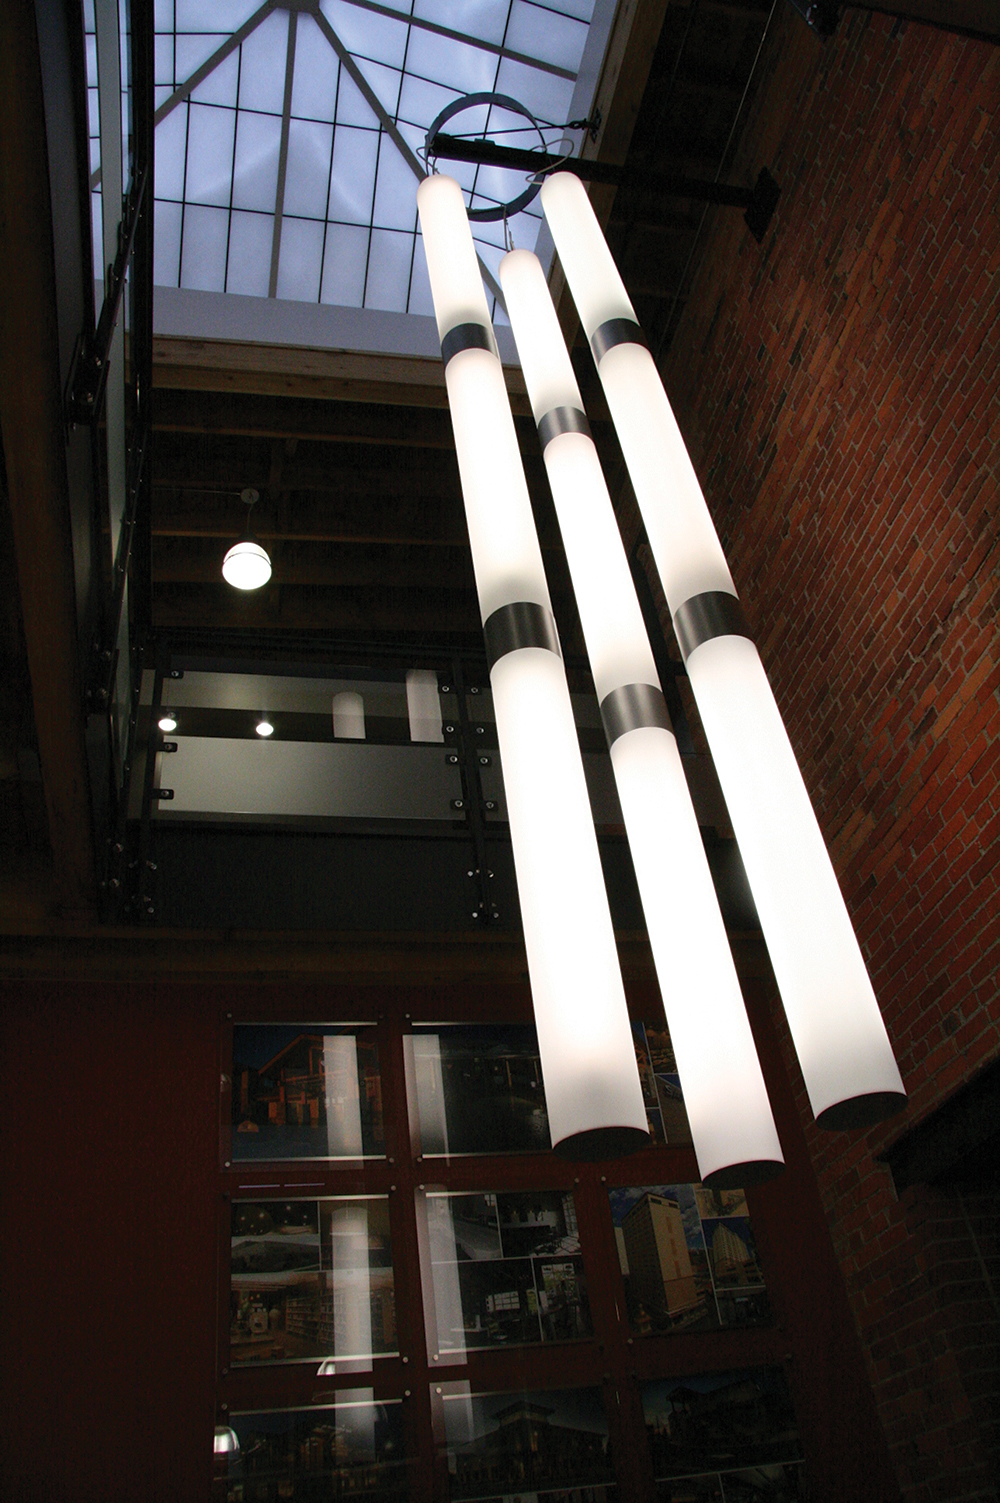 Sequence pendants linked in three tandem strands of three in a configuration of custom light-fixtures for an office lobby.